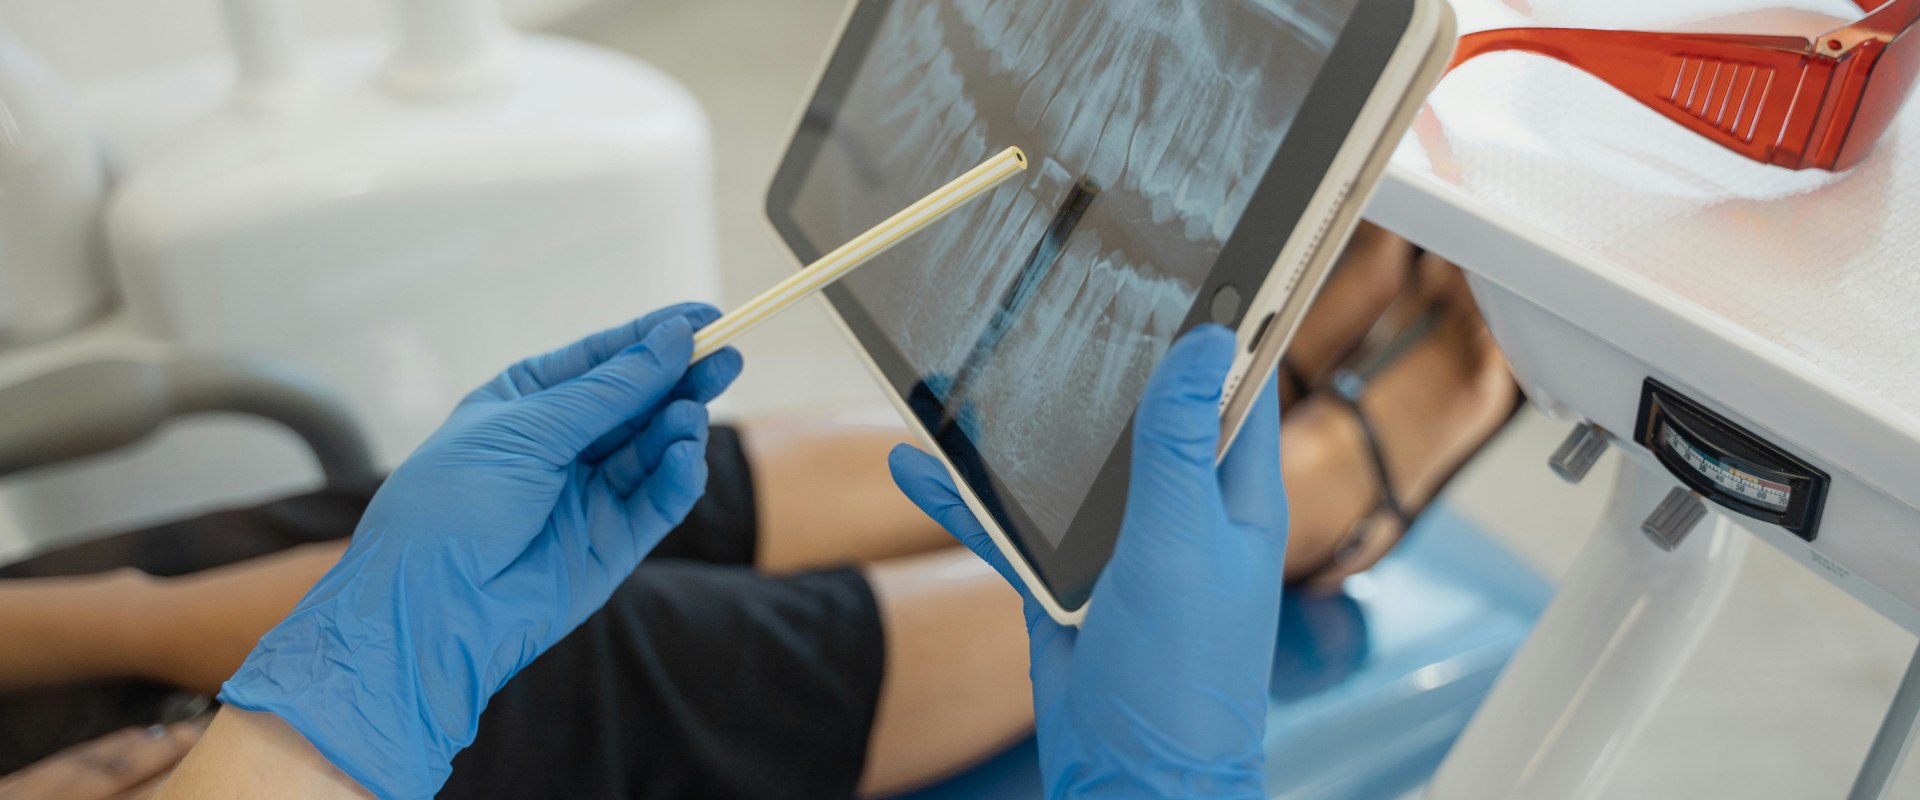 Root Canal Treatment Excellence: Safeguarding Preventive Health Care in Round Rock